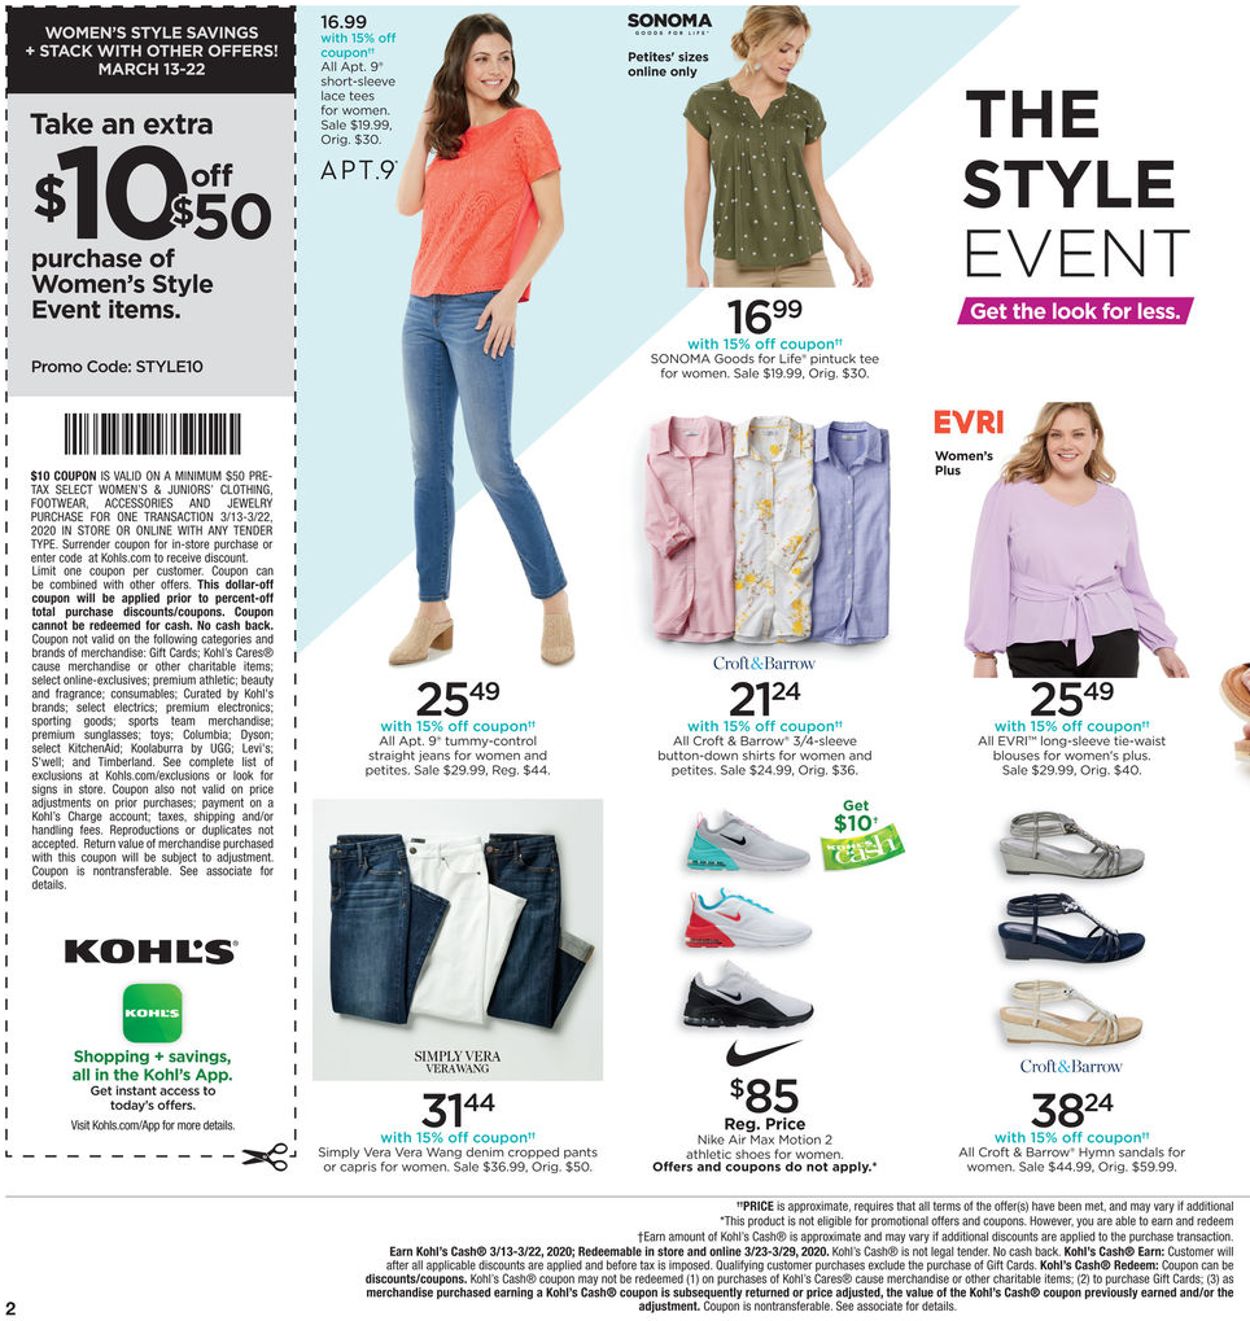 Kohl's Current weekly ad 03/13 - 03/22/2020 [2] - frequent-ads.com